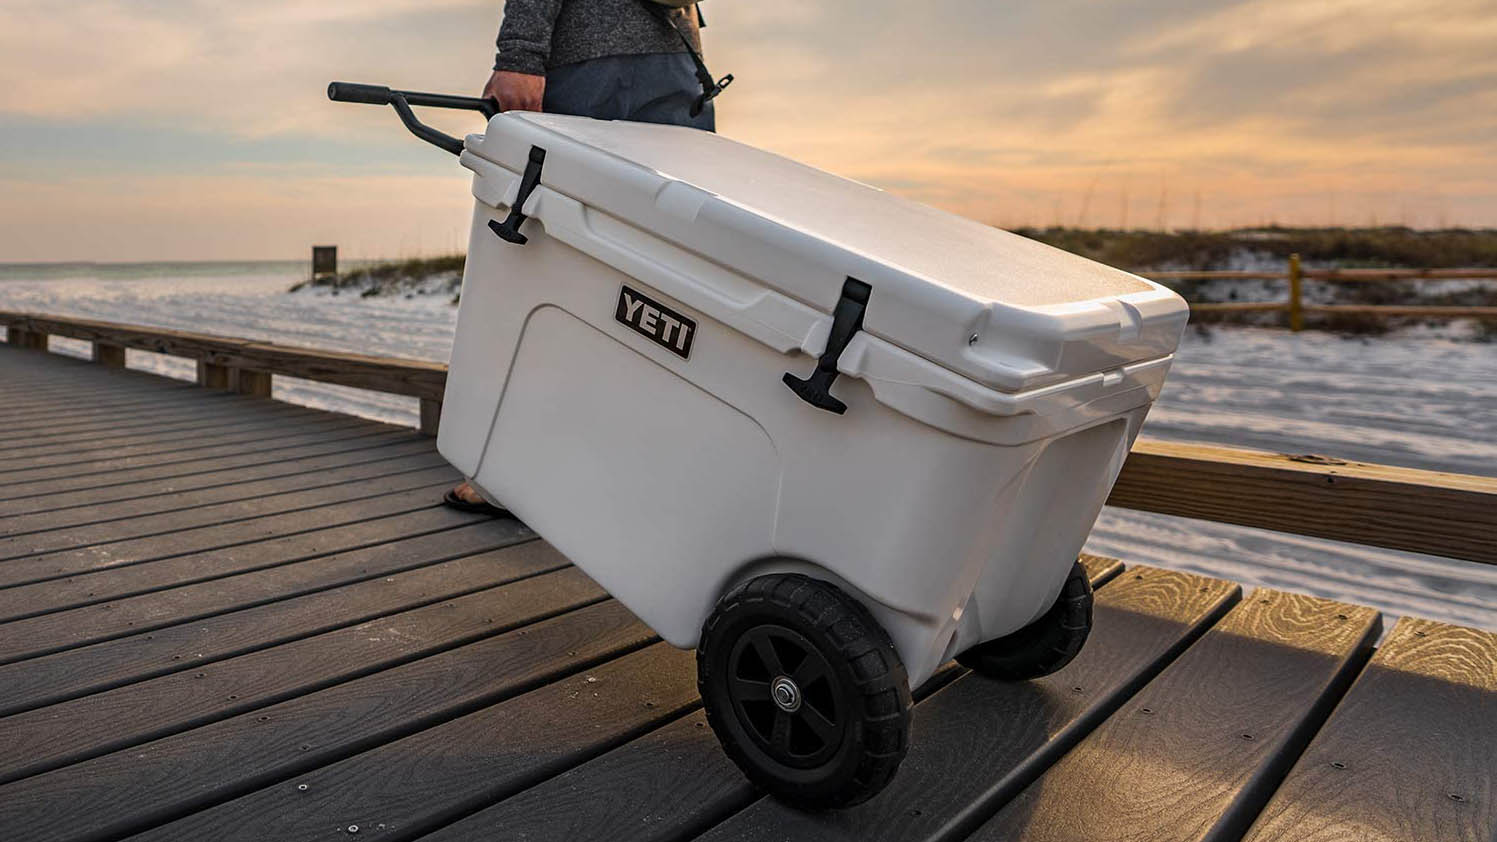 Best YETI deals for the holidays — save on coolers and accessories